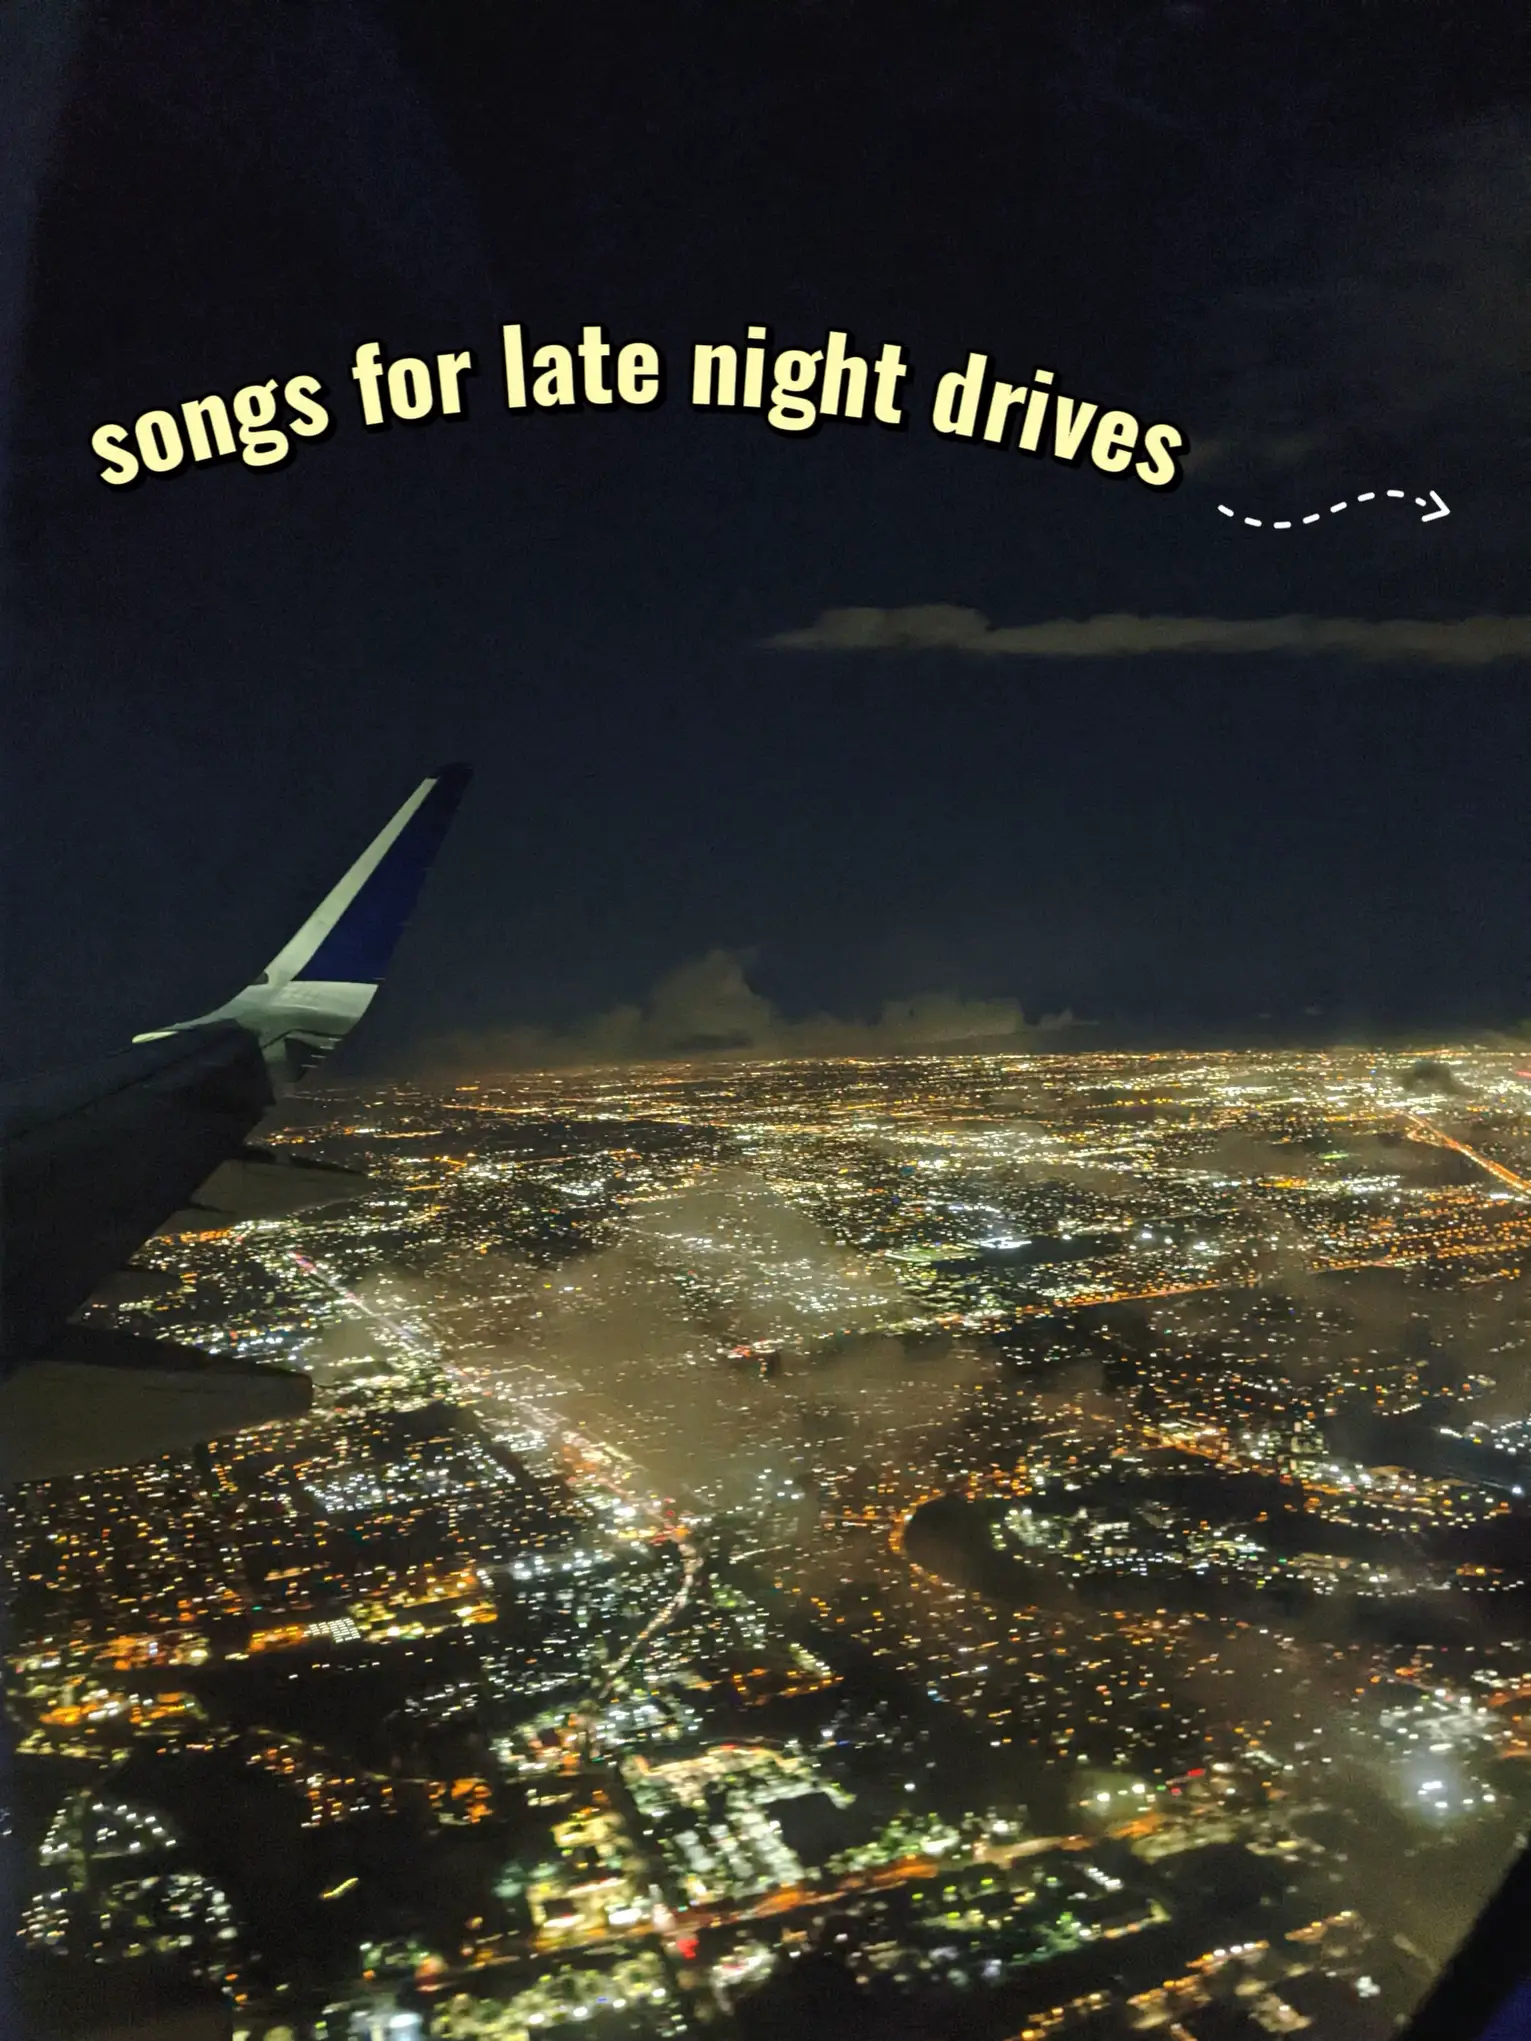  A plane flying over a city at night with the words "Late Night Drives" above it.